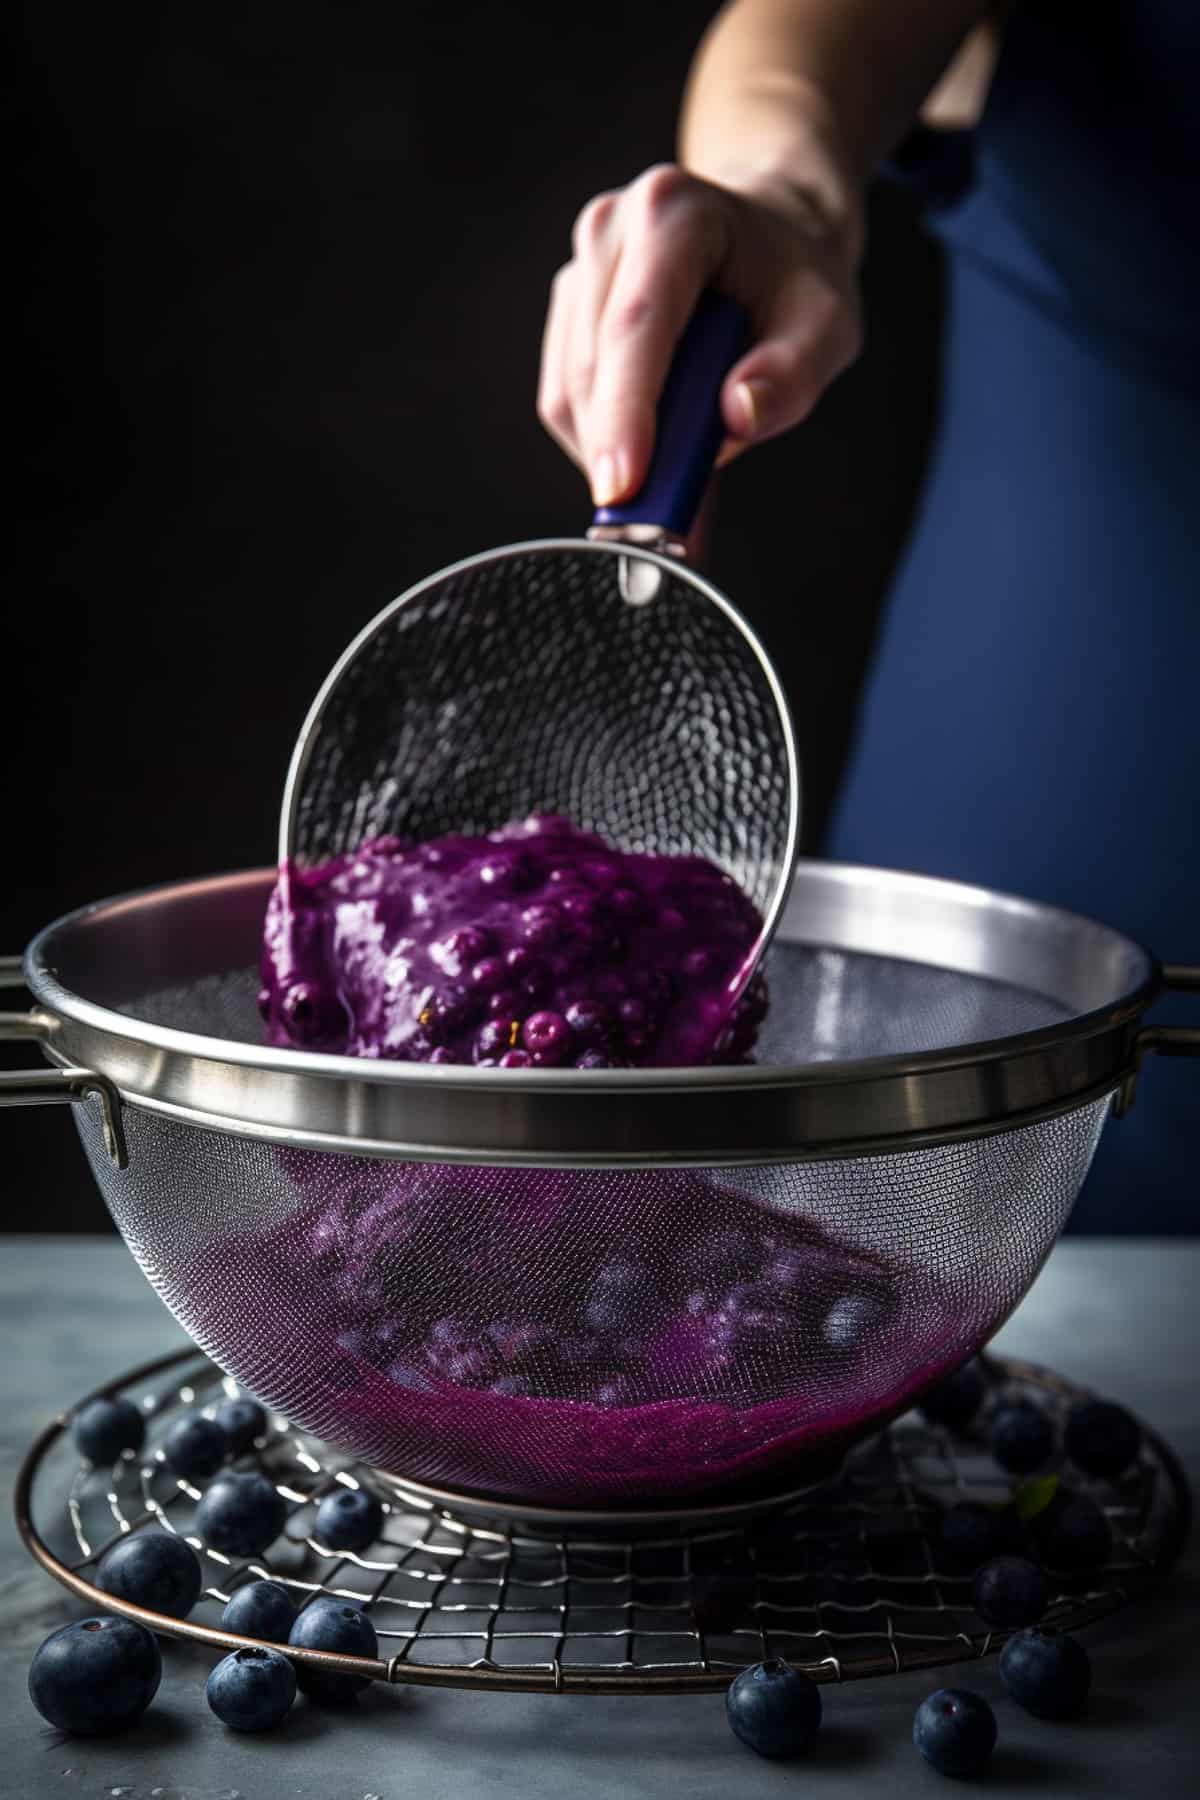 Blueberries being strained for making puree.